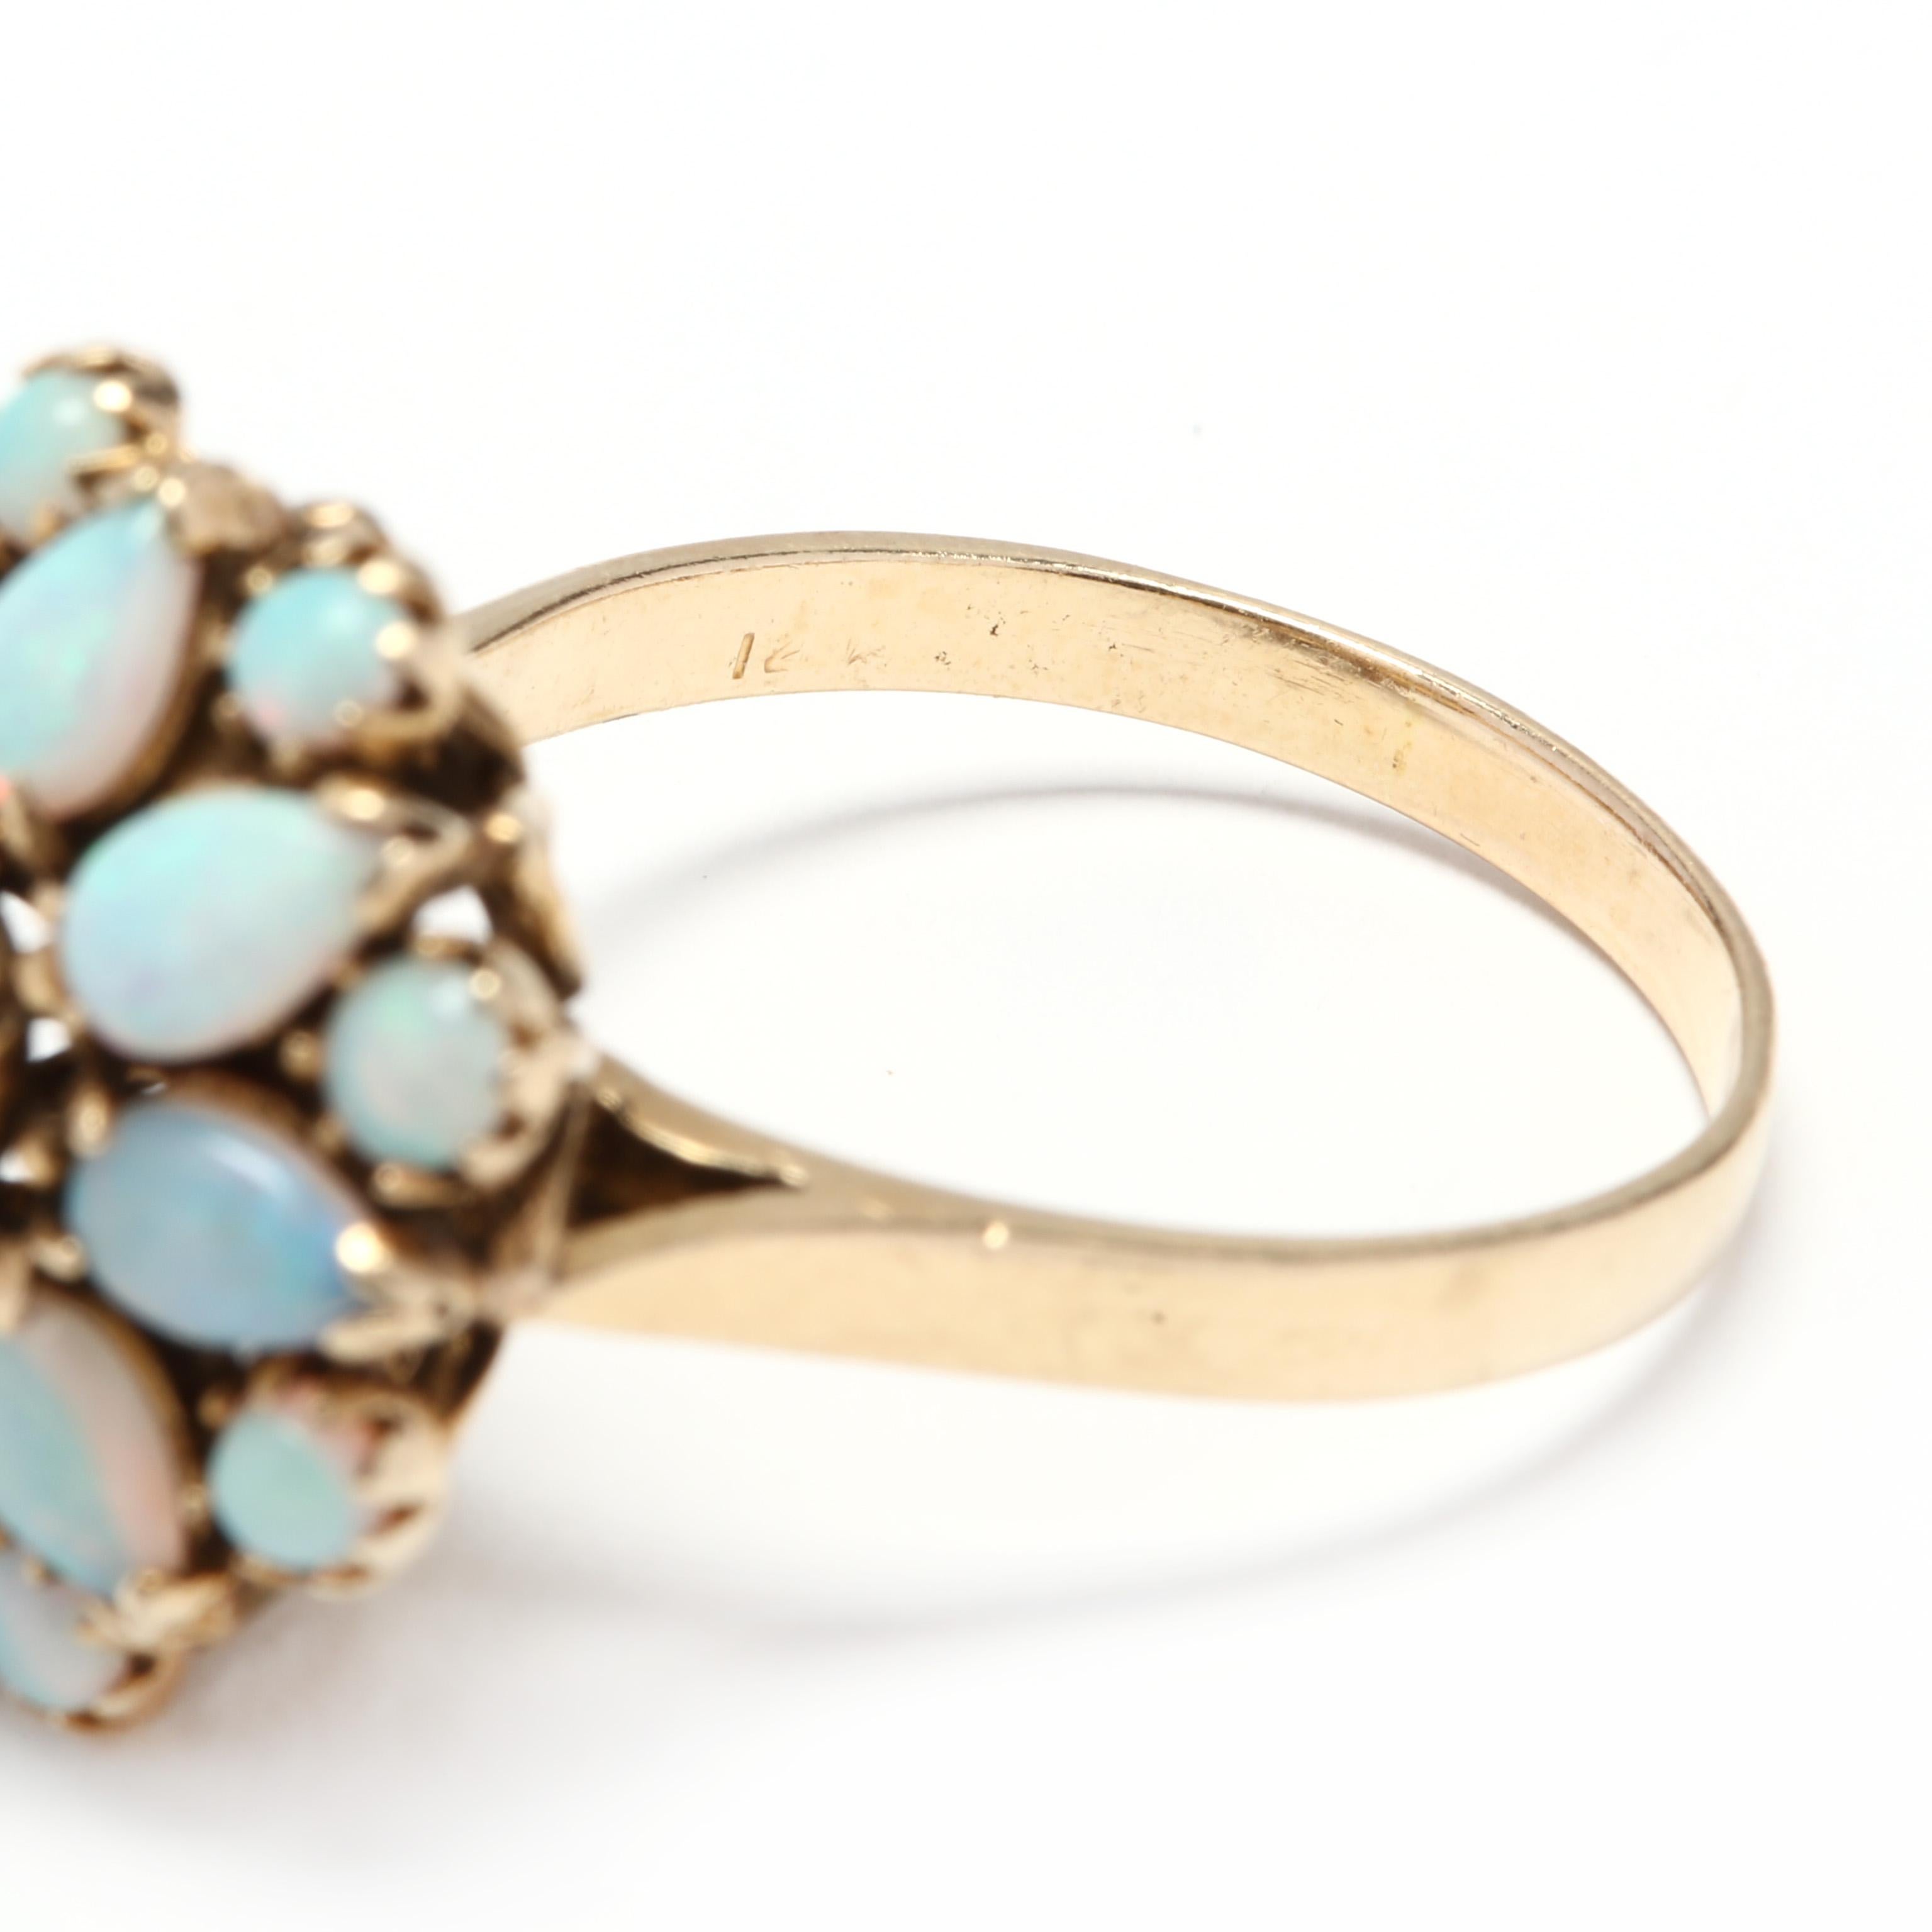 Women's or Men's 14 Karat Yellow Gold and Opal Flower Cocktail Ring